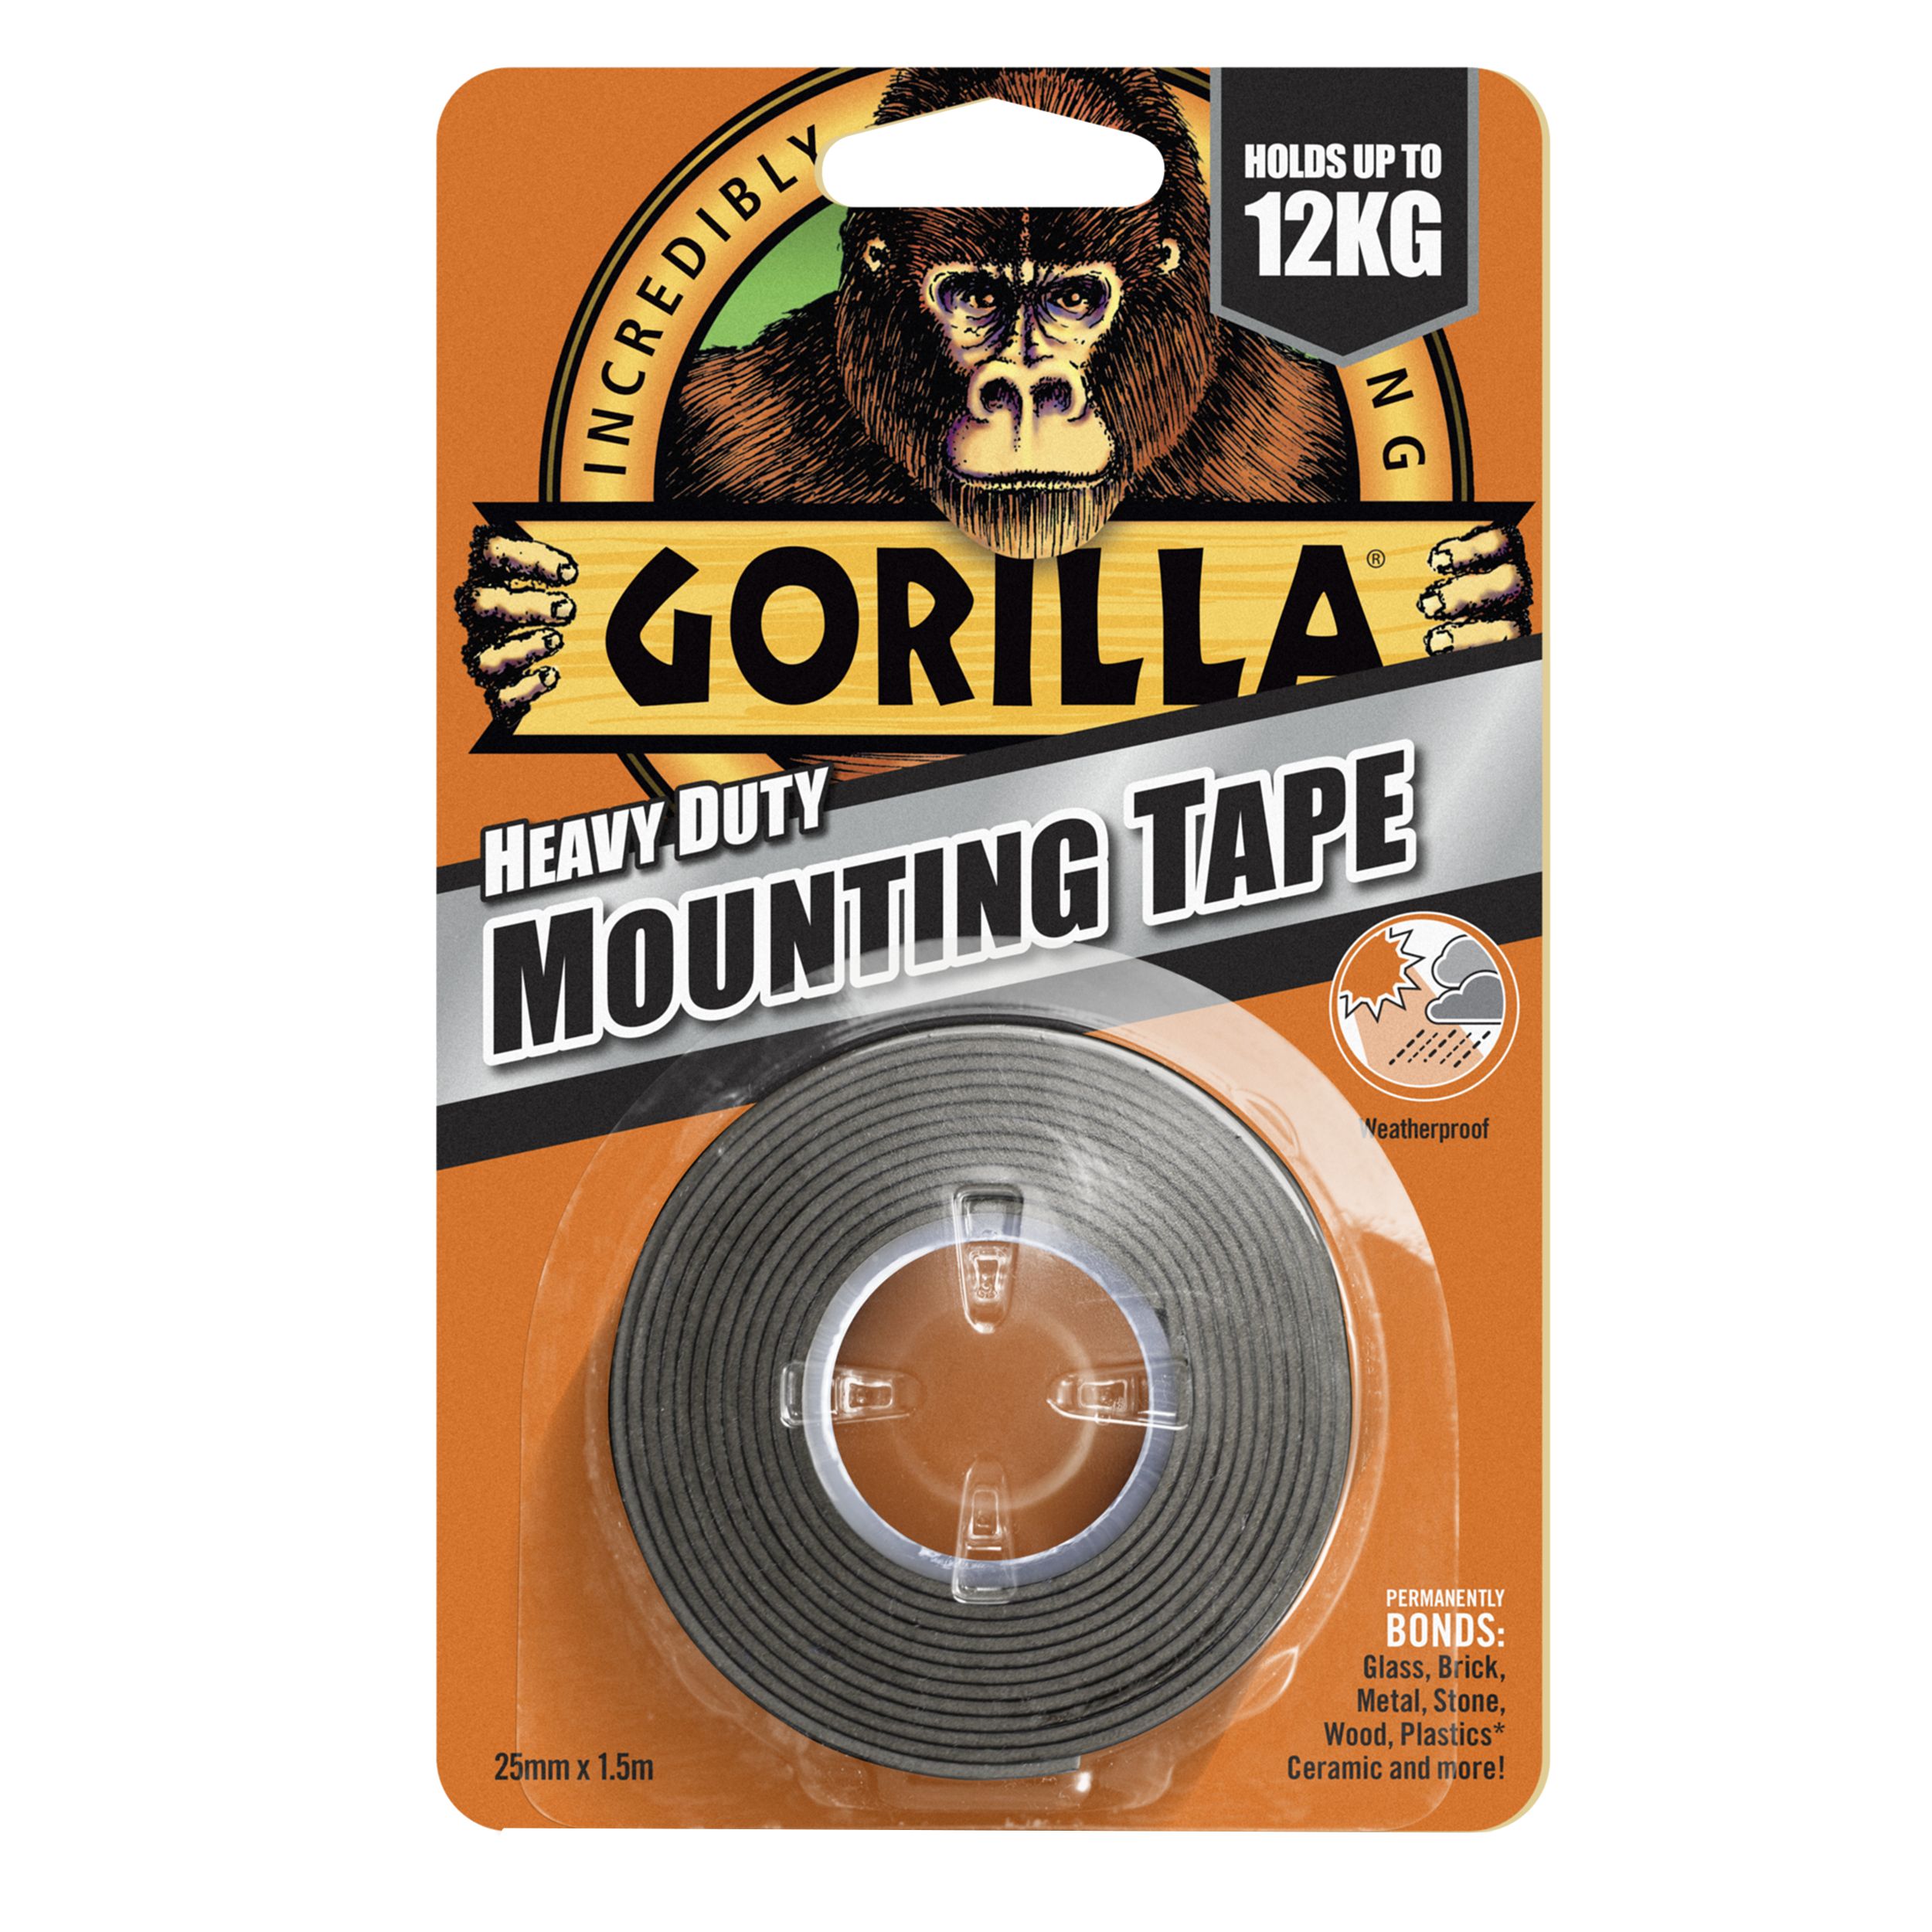 Gorilla Mounting Tape Product Video 